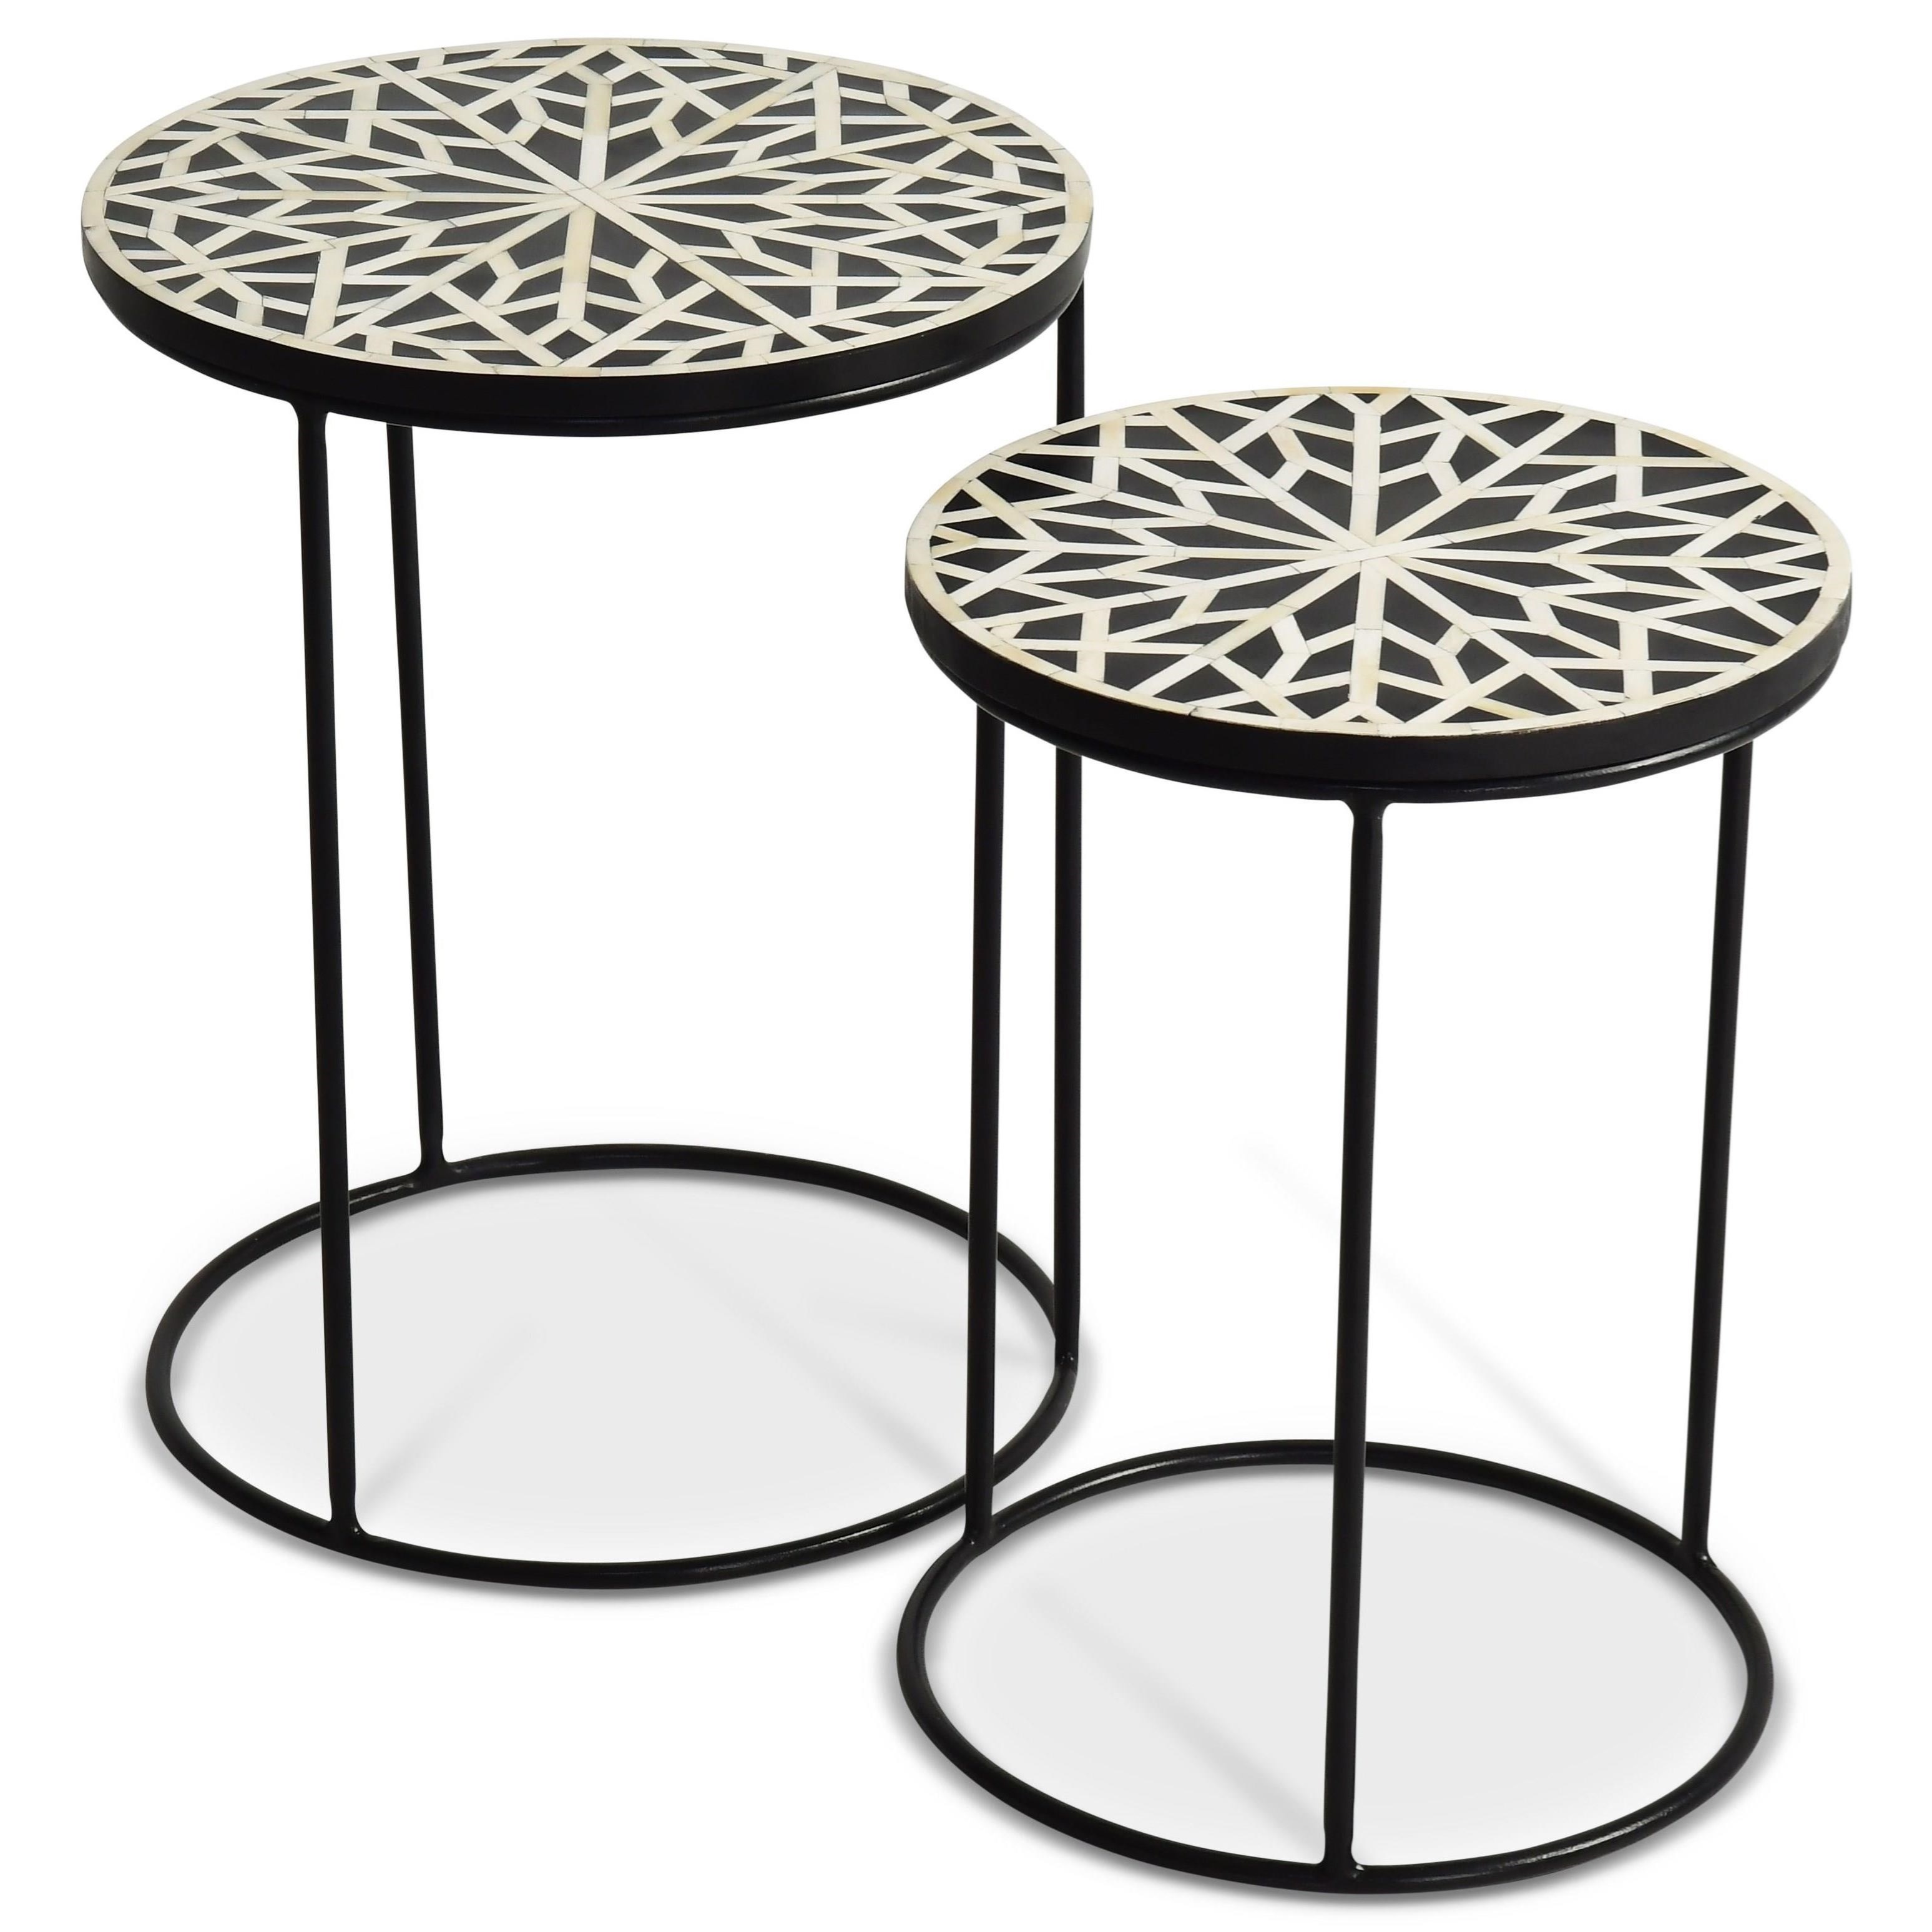 contemporary amisha nesting tables accents steve silver products color threshold parquet accent table wilcox furniture end outdoor swing turkish iron small with drawers solid